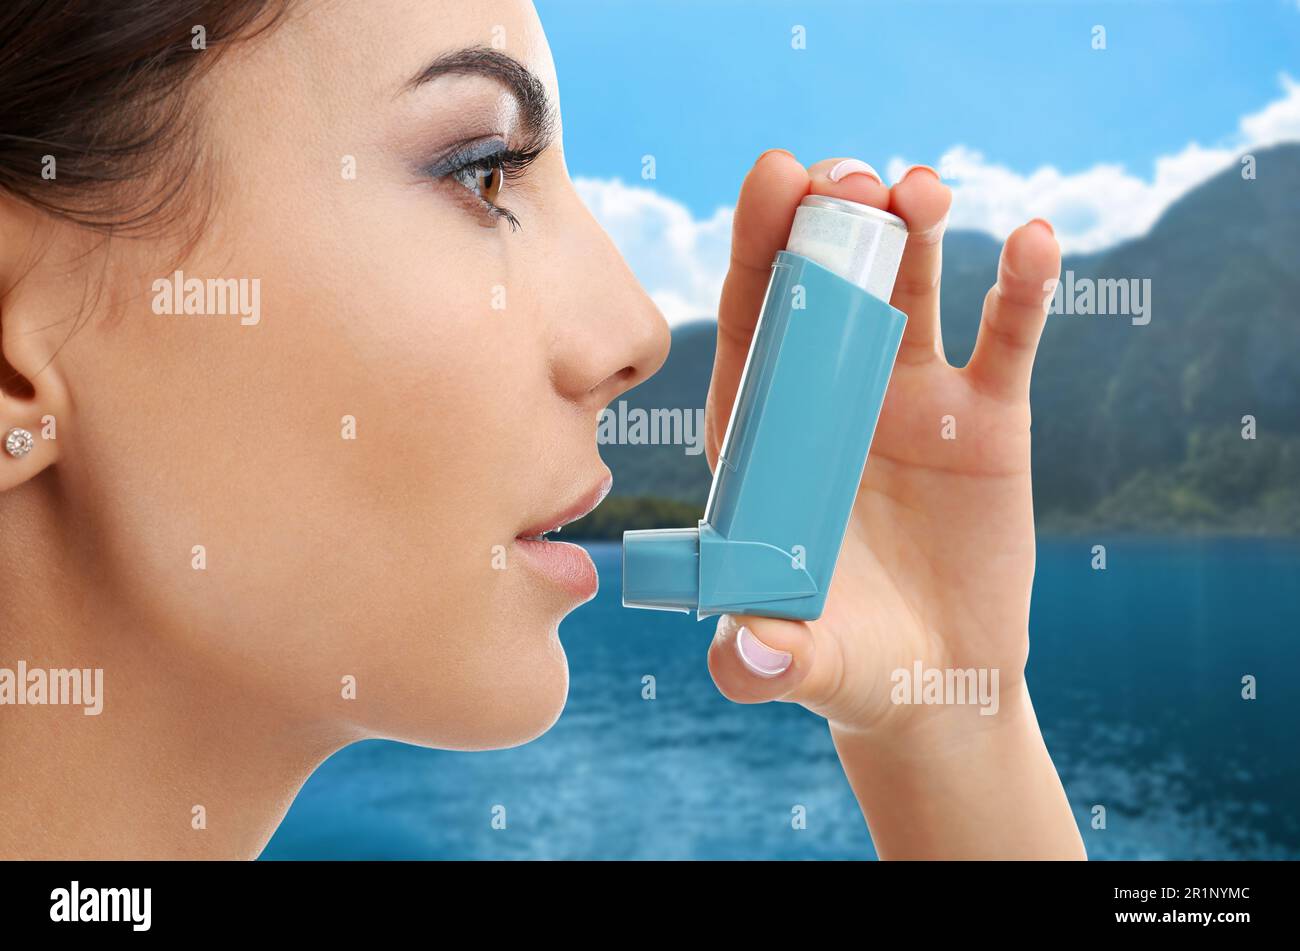 Woman using asthma inhaler near lake. Emergency first aid during outdoor recreation Stock Photo